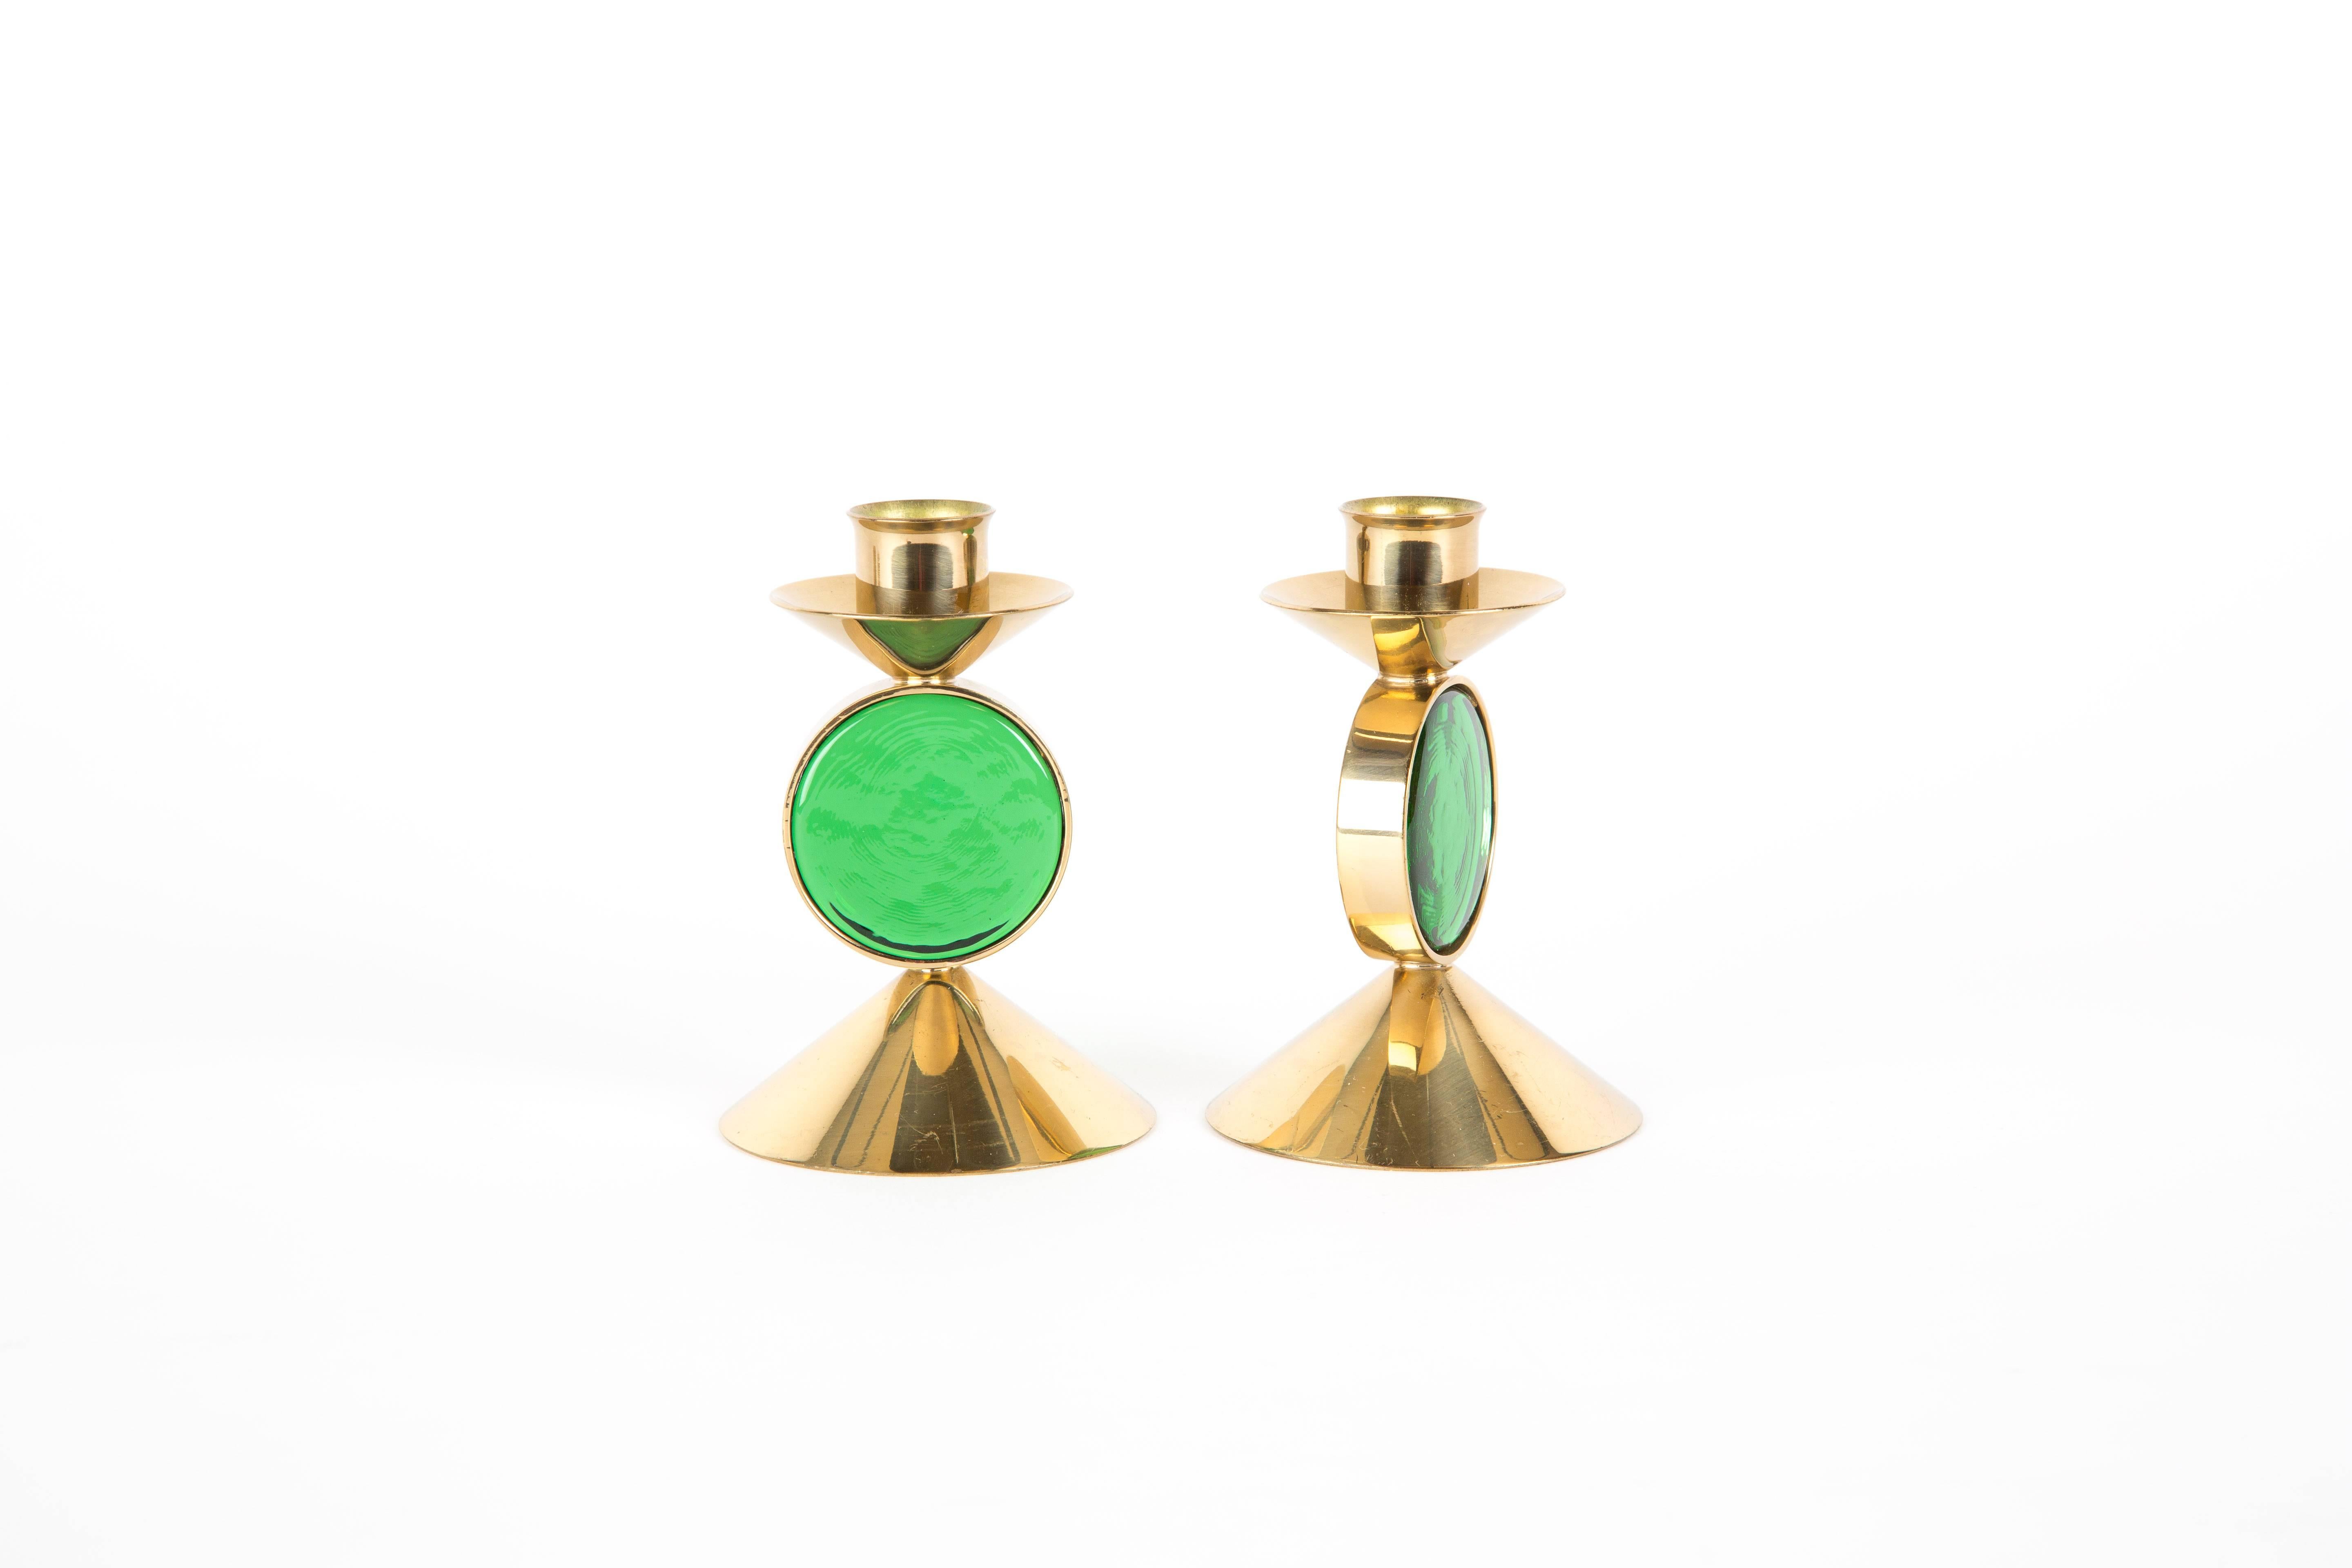 20th Century  Set of GREEN GUNNAR ANDER candle holders for Ystad-Metall  in Brass